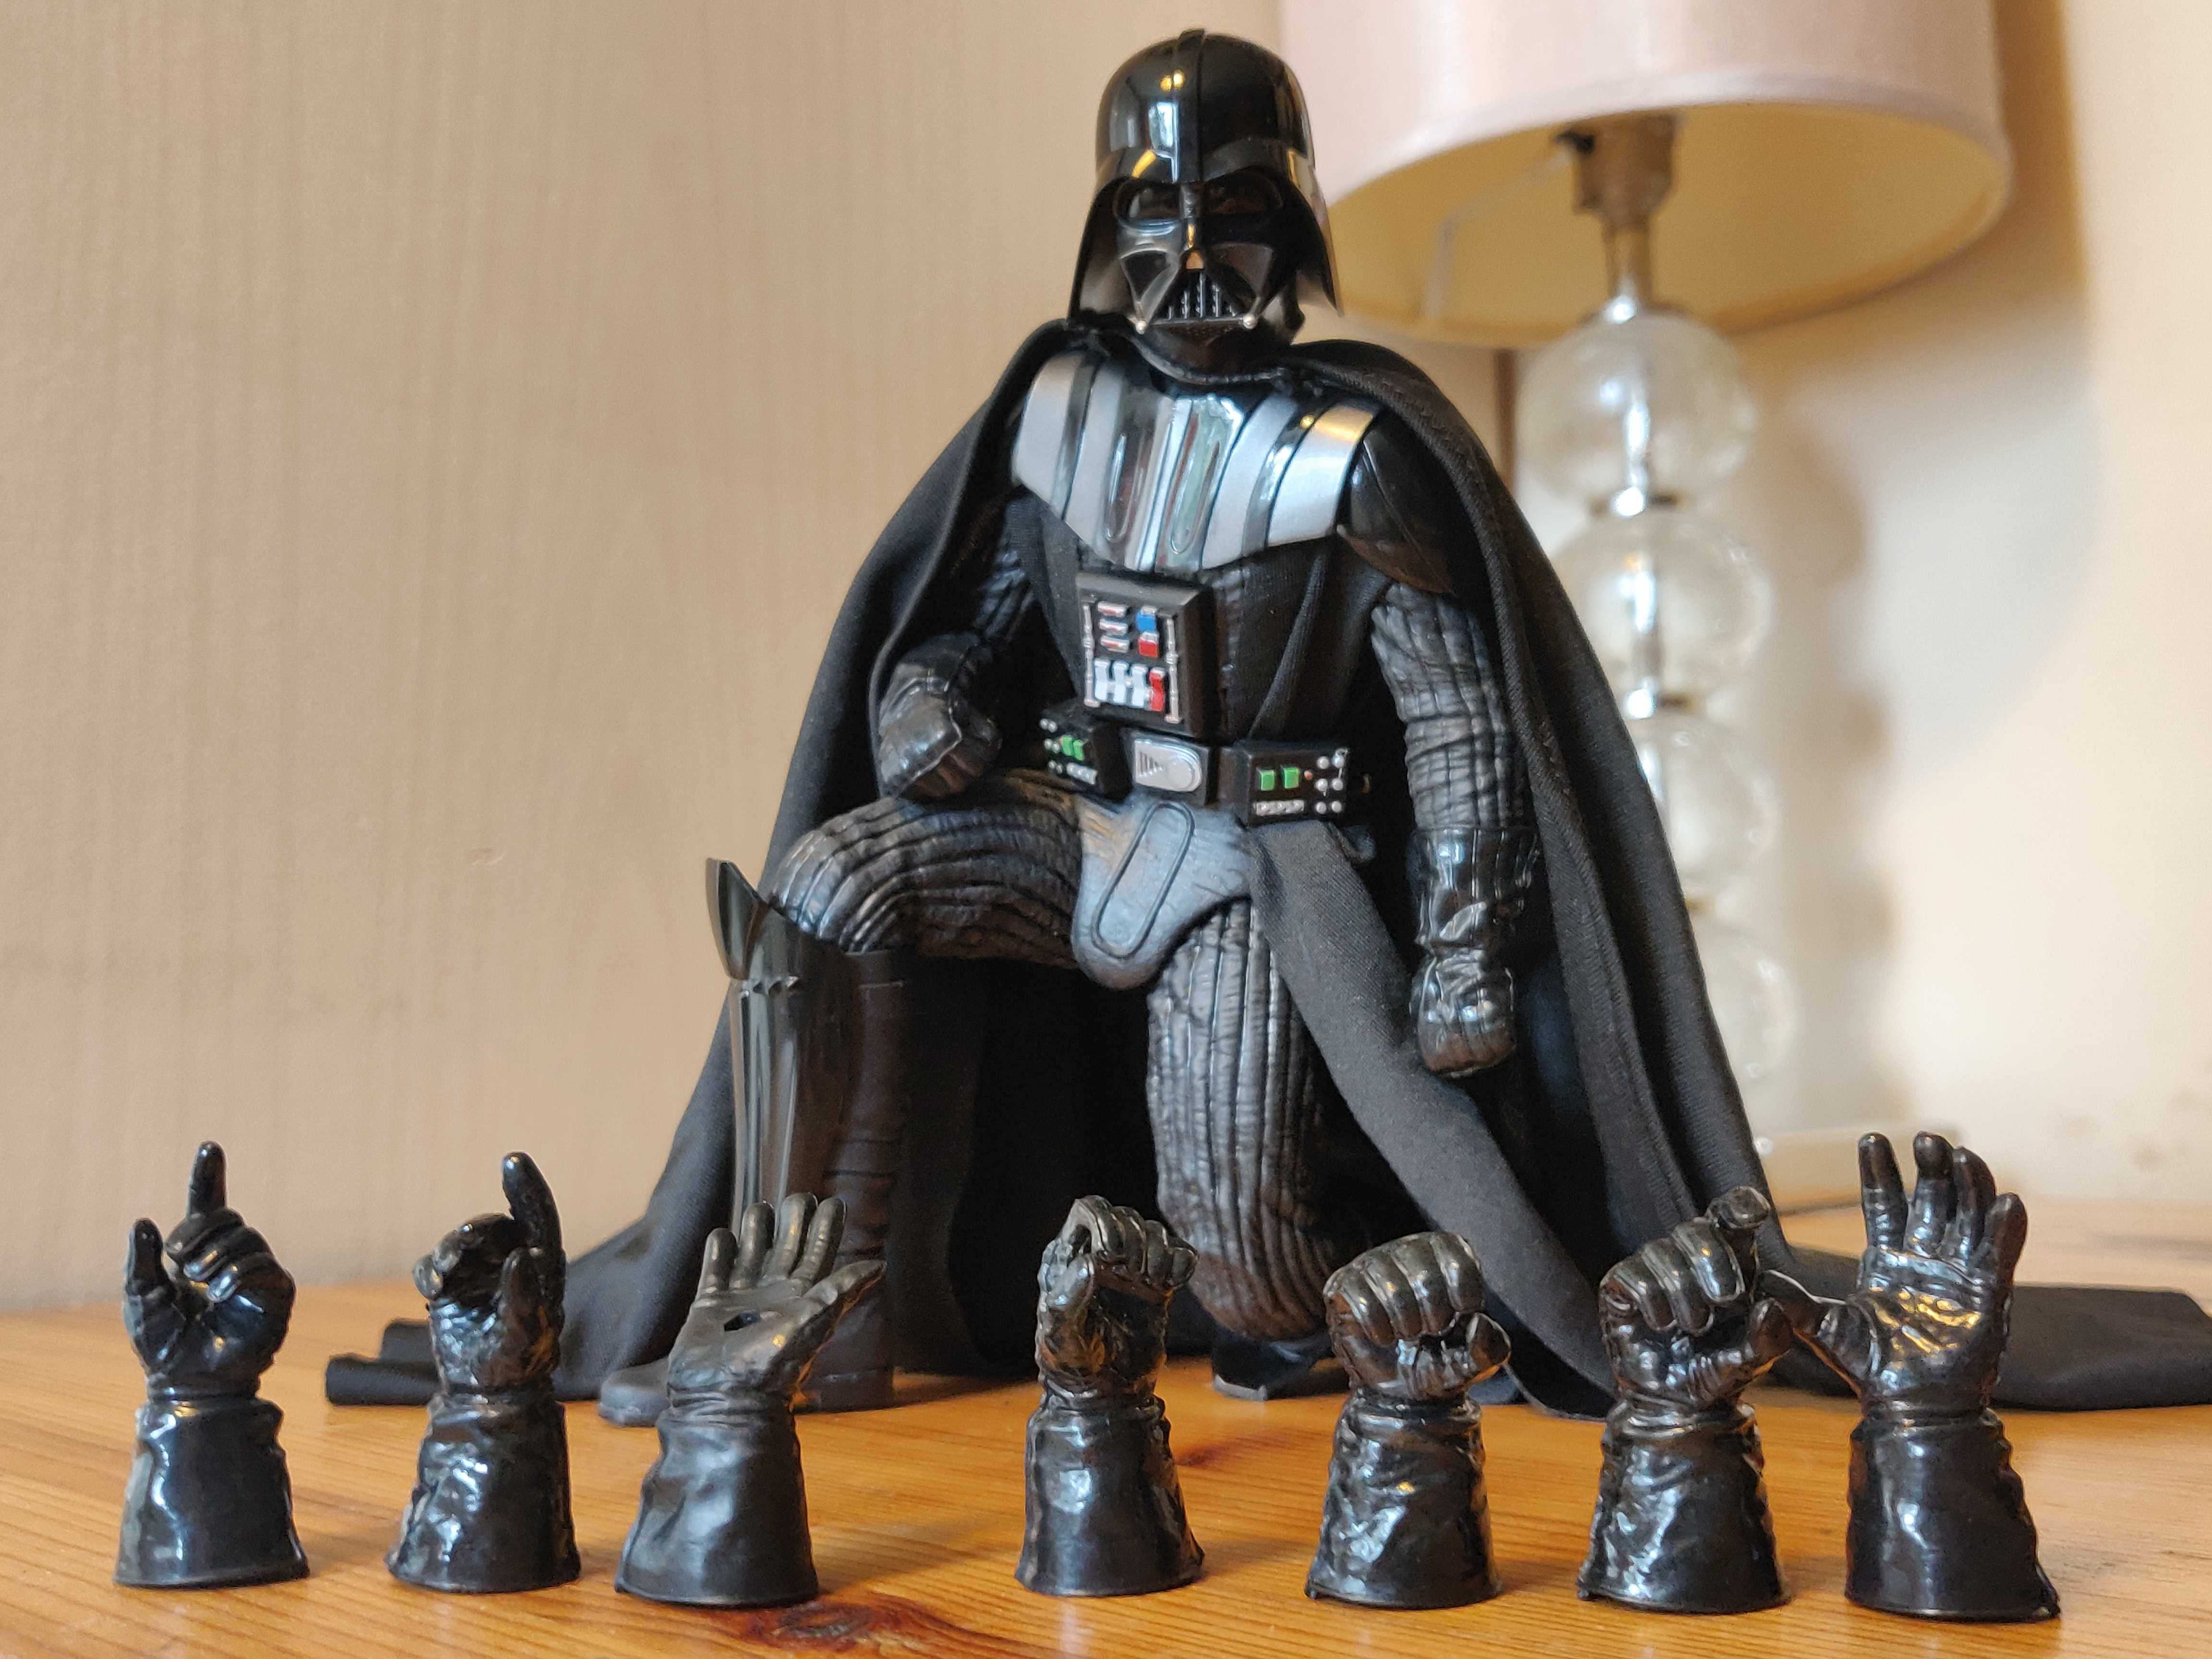 most expensive darth vader figure